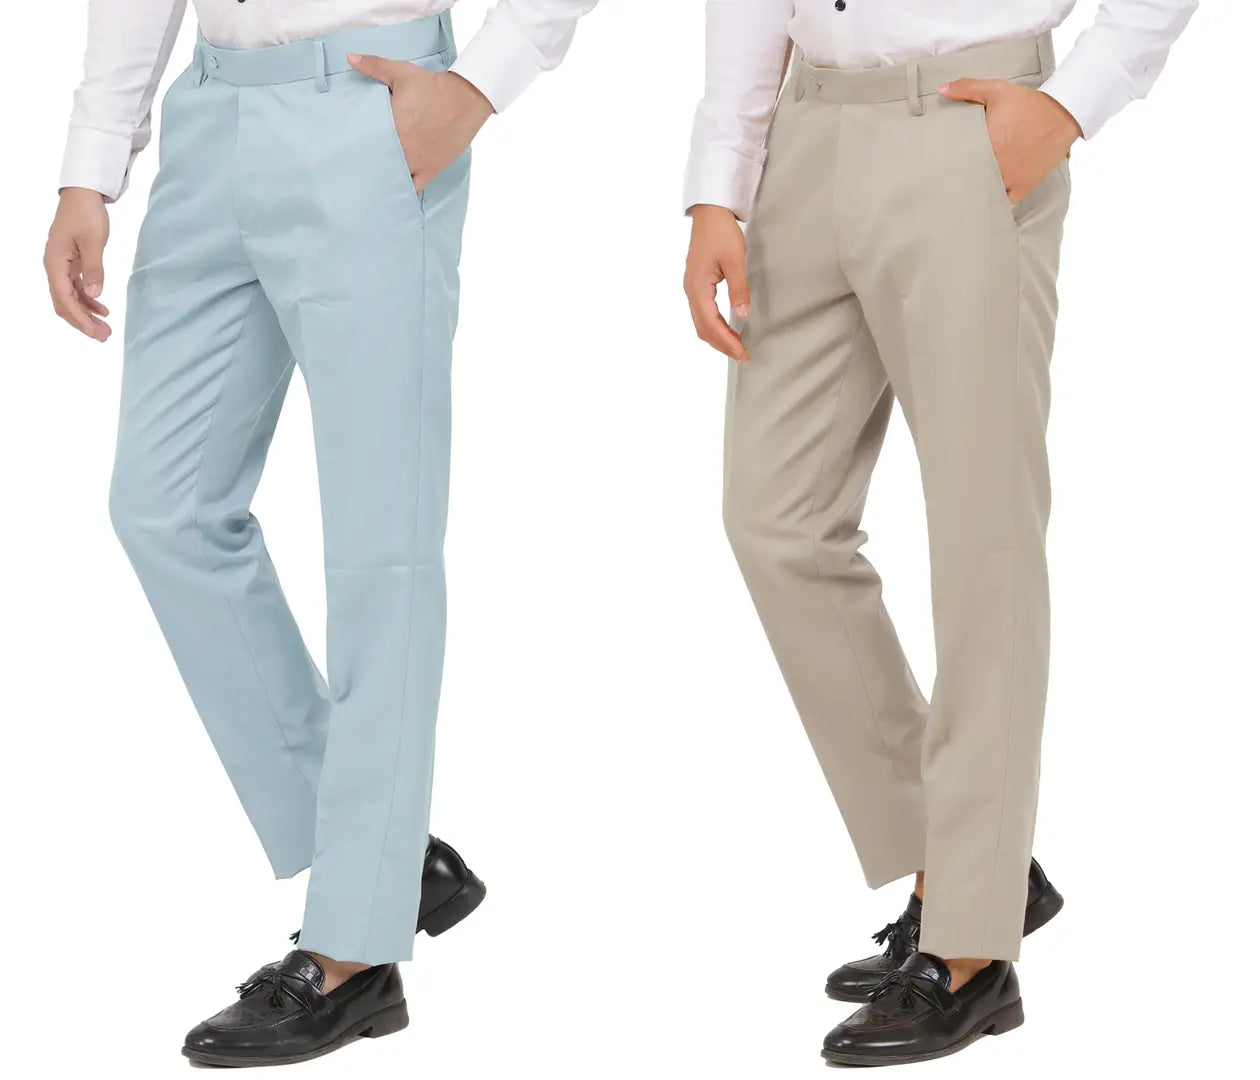 Kundan Men Poly-Viscose Blended Light Sky Blue and Light Cot Brown Formal Trousers ( Pack of 2 Trousers )